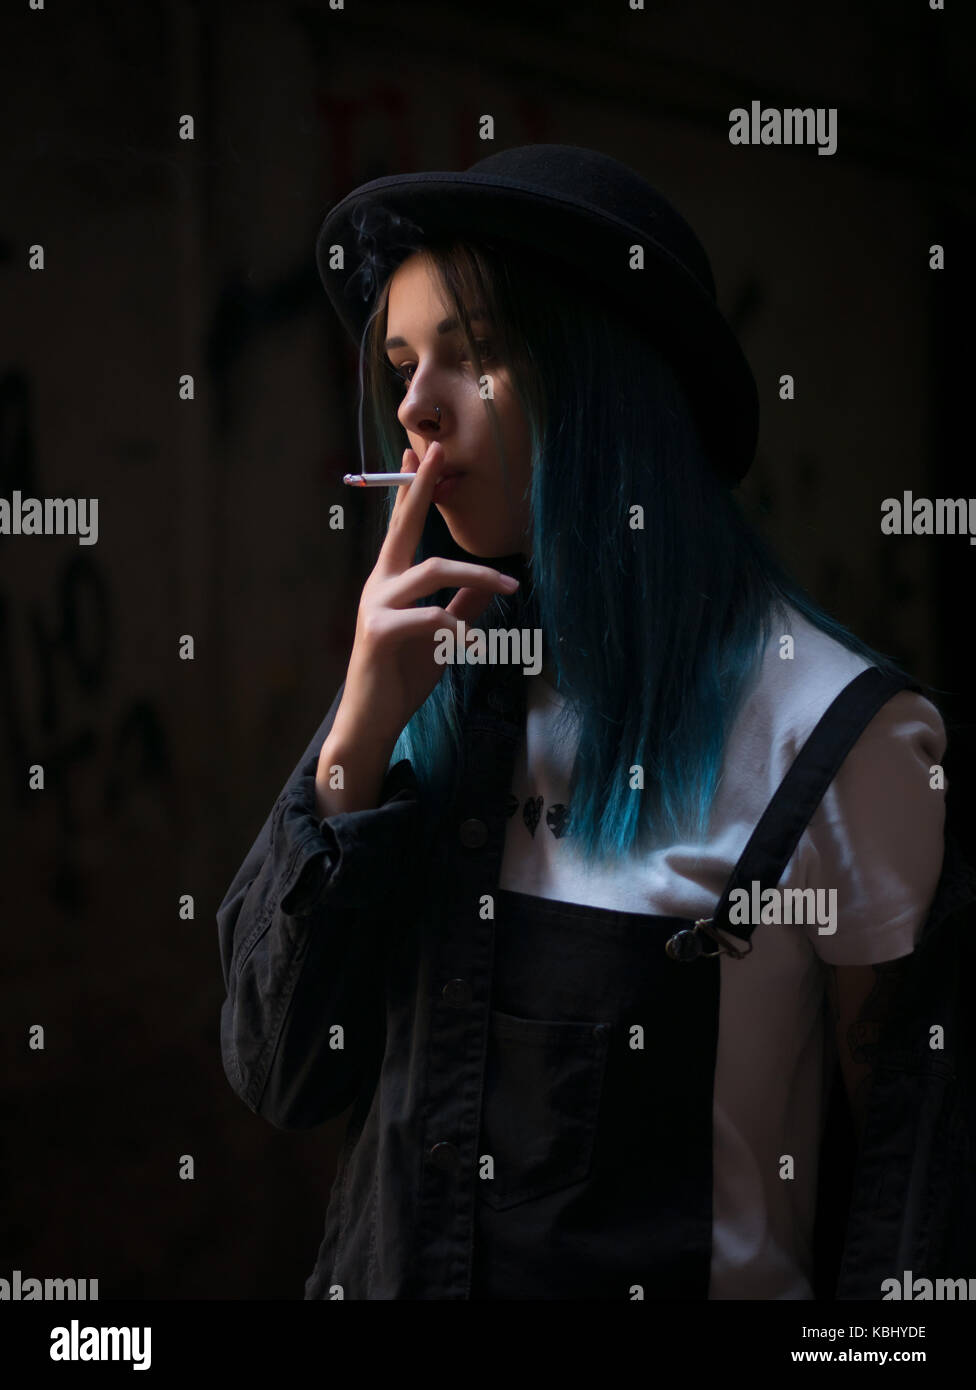 græs plejeforældre hastighed Emo girl smoking cigarette.Street punk or hipster woman with blue colorful  dyed hair, hat, piercing,lenses,ears tunnels and unusual hairstyle stands i  Stock Photo - Alamy